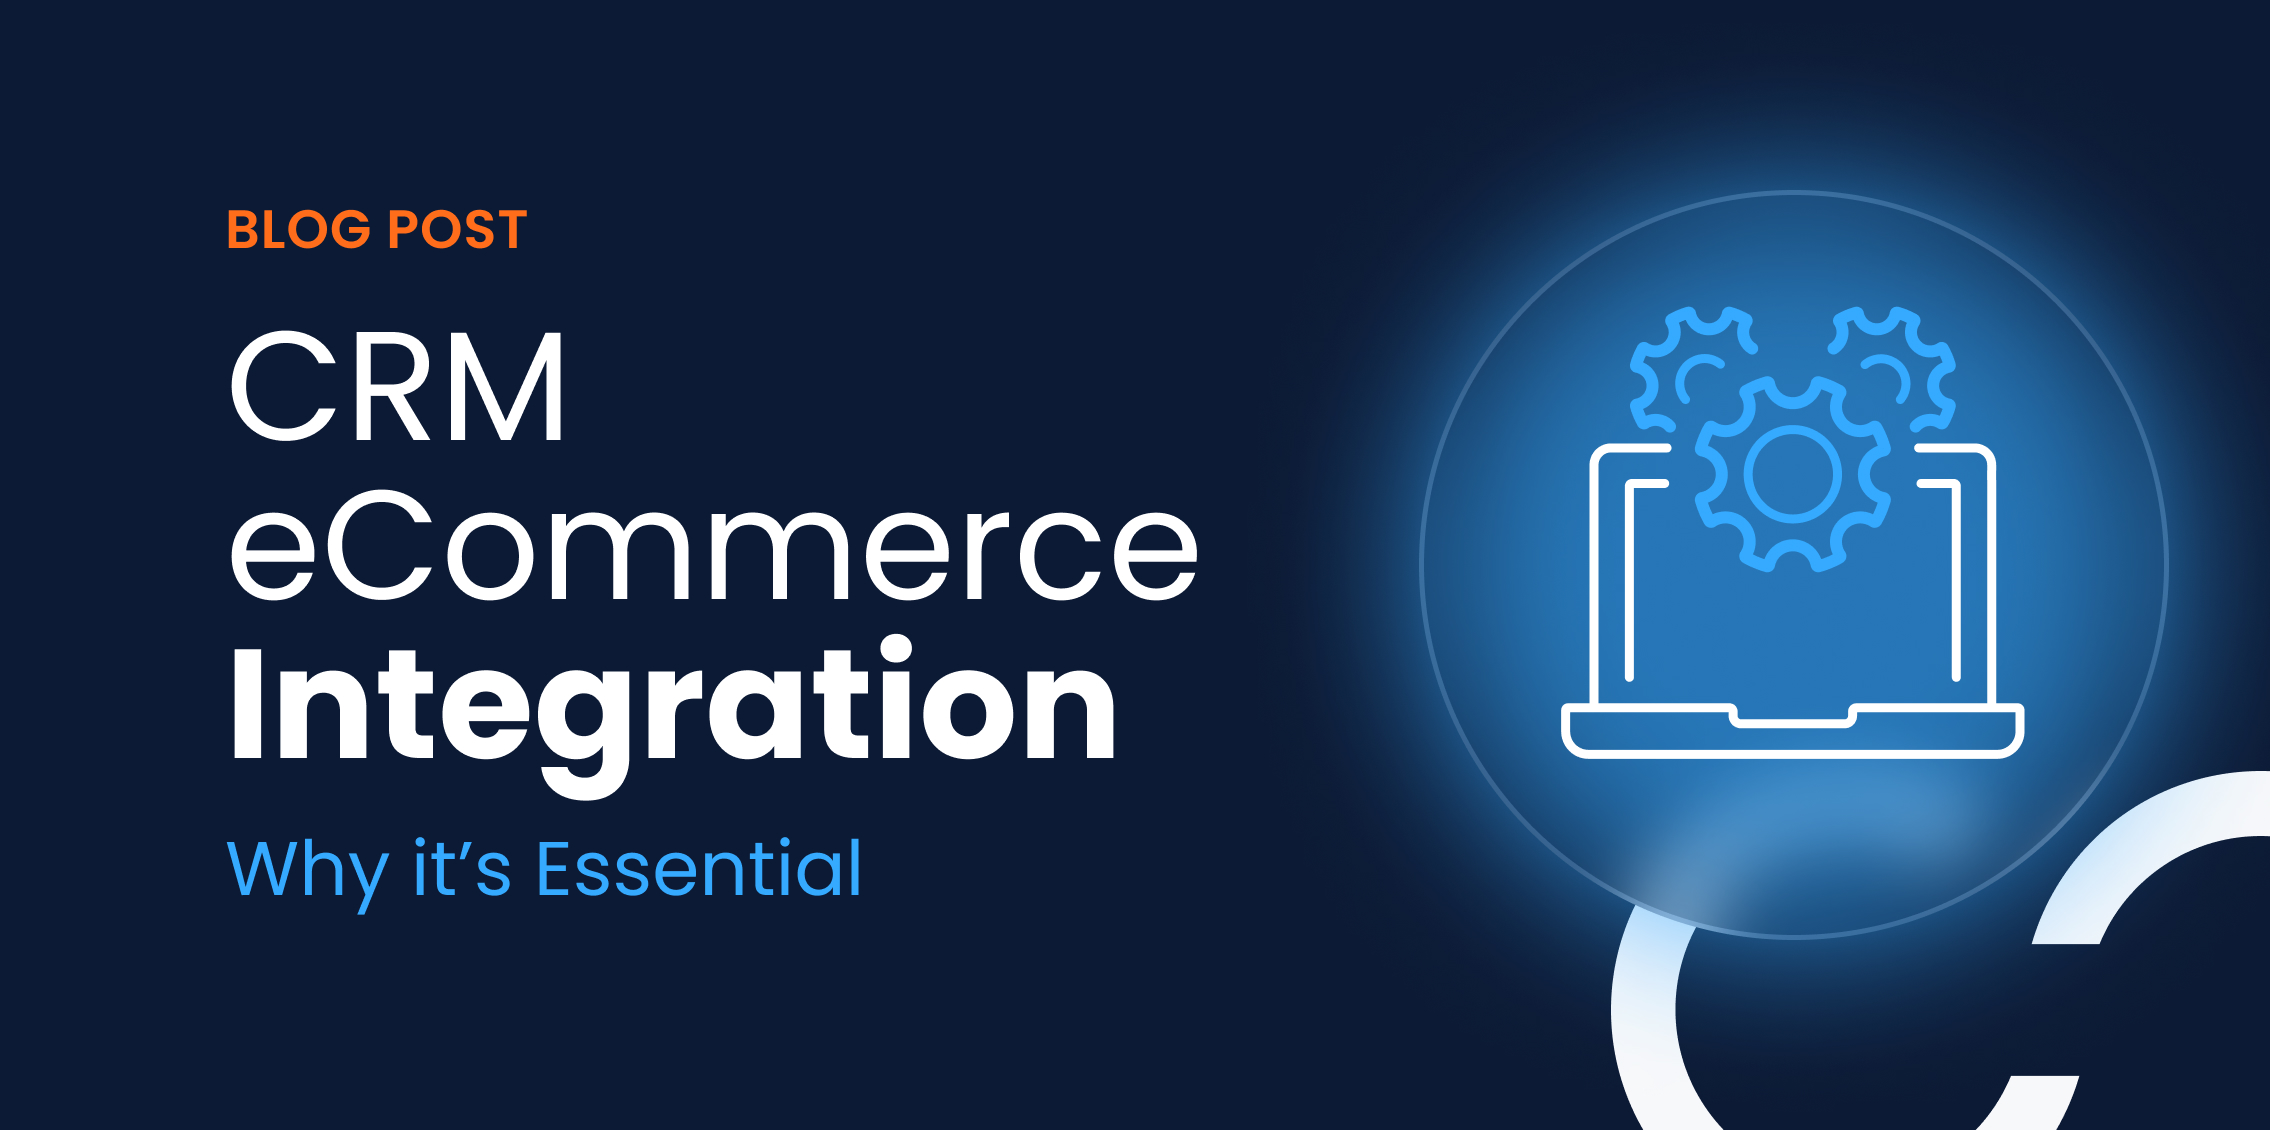 ecommerce crm integration is essential for distributors